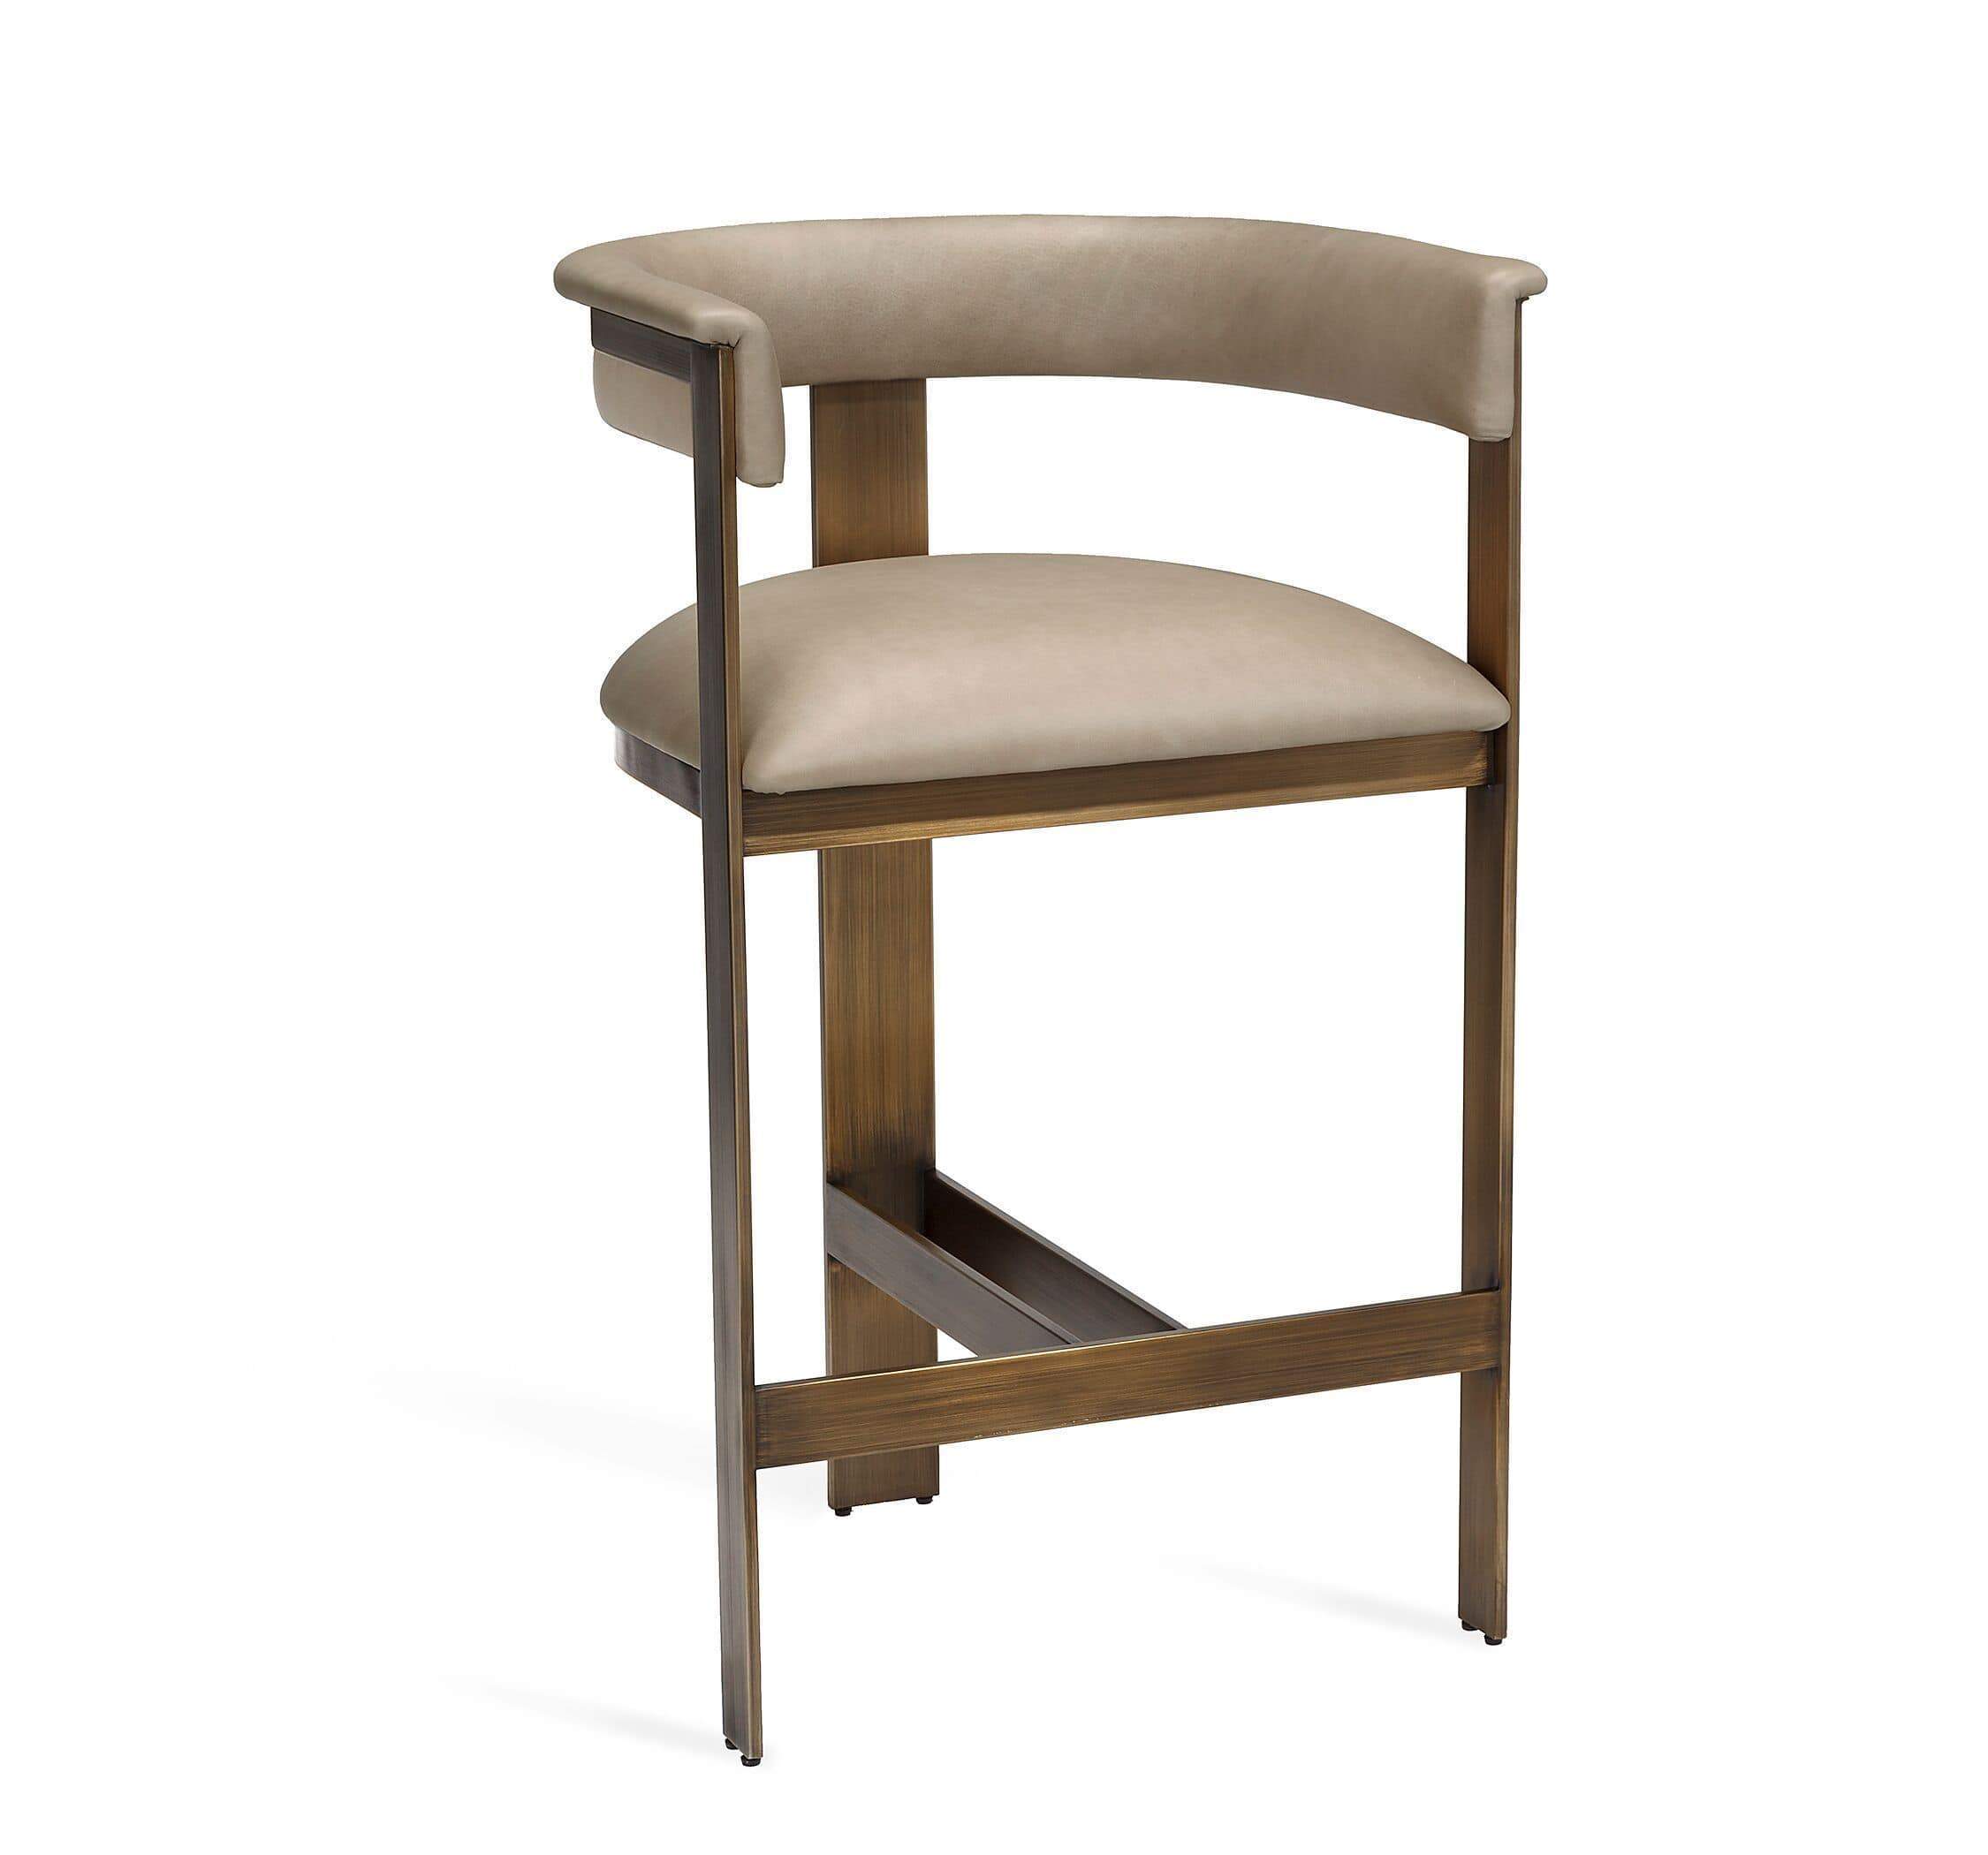 Interlude Home Darcy Counter Stool in Taupe